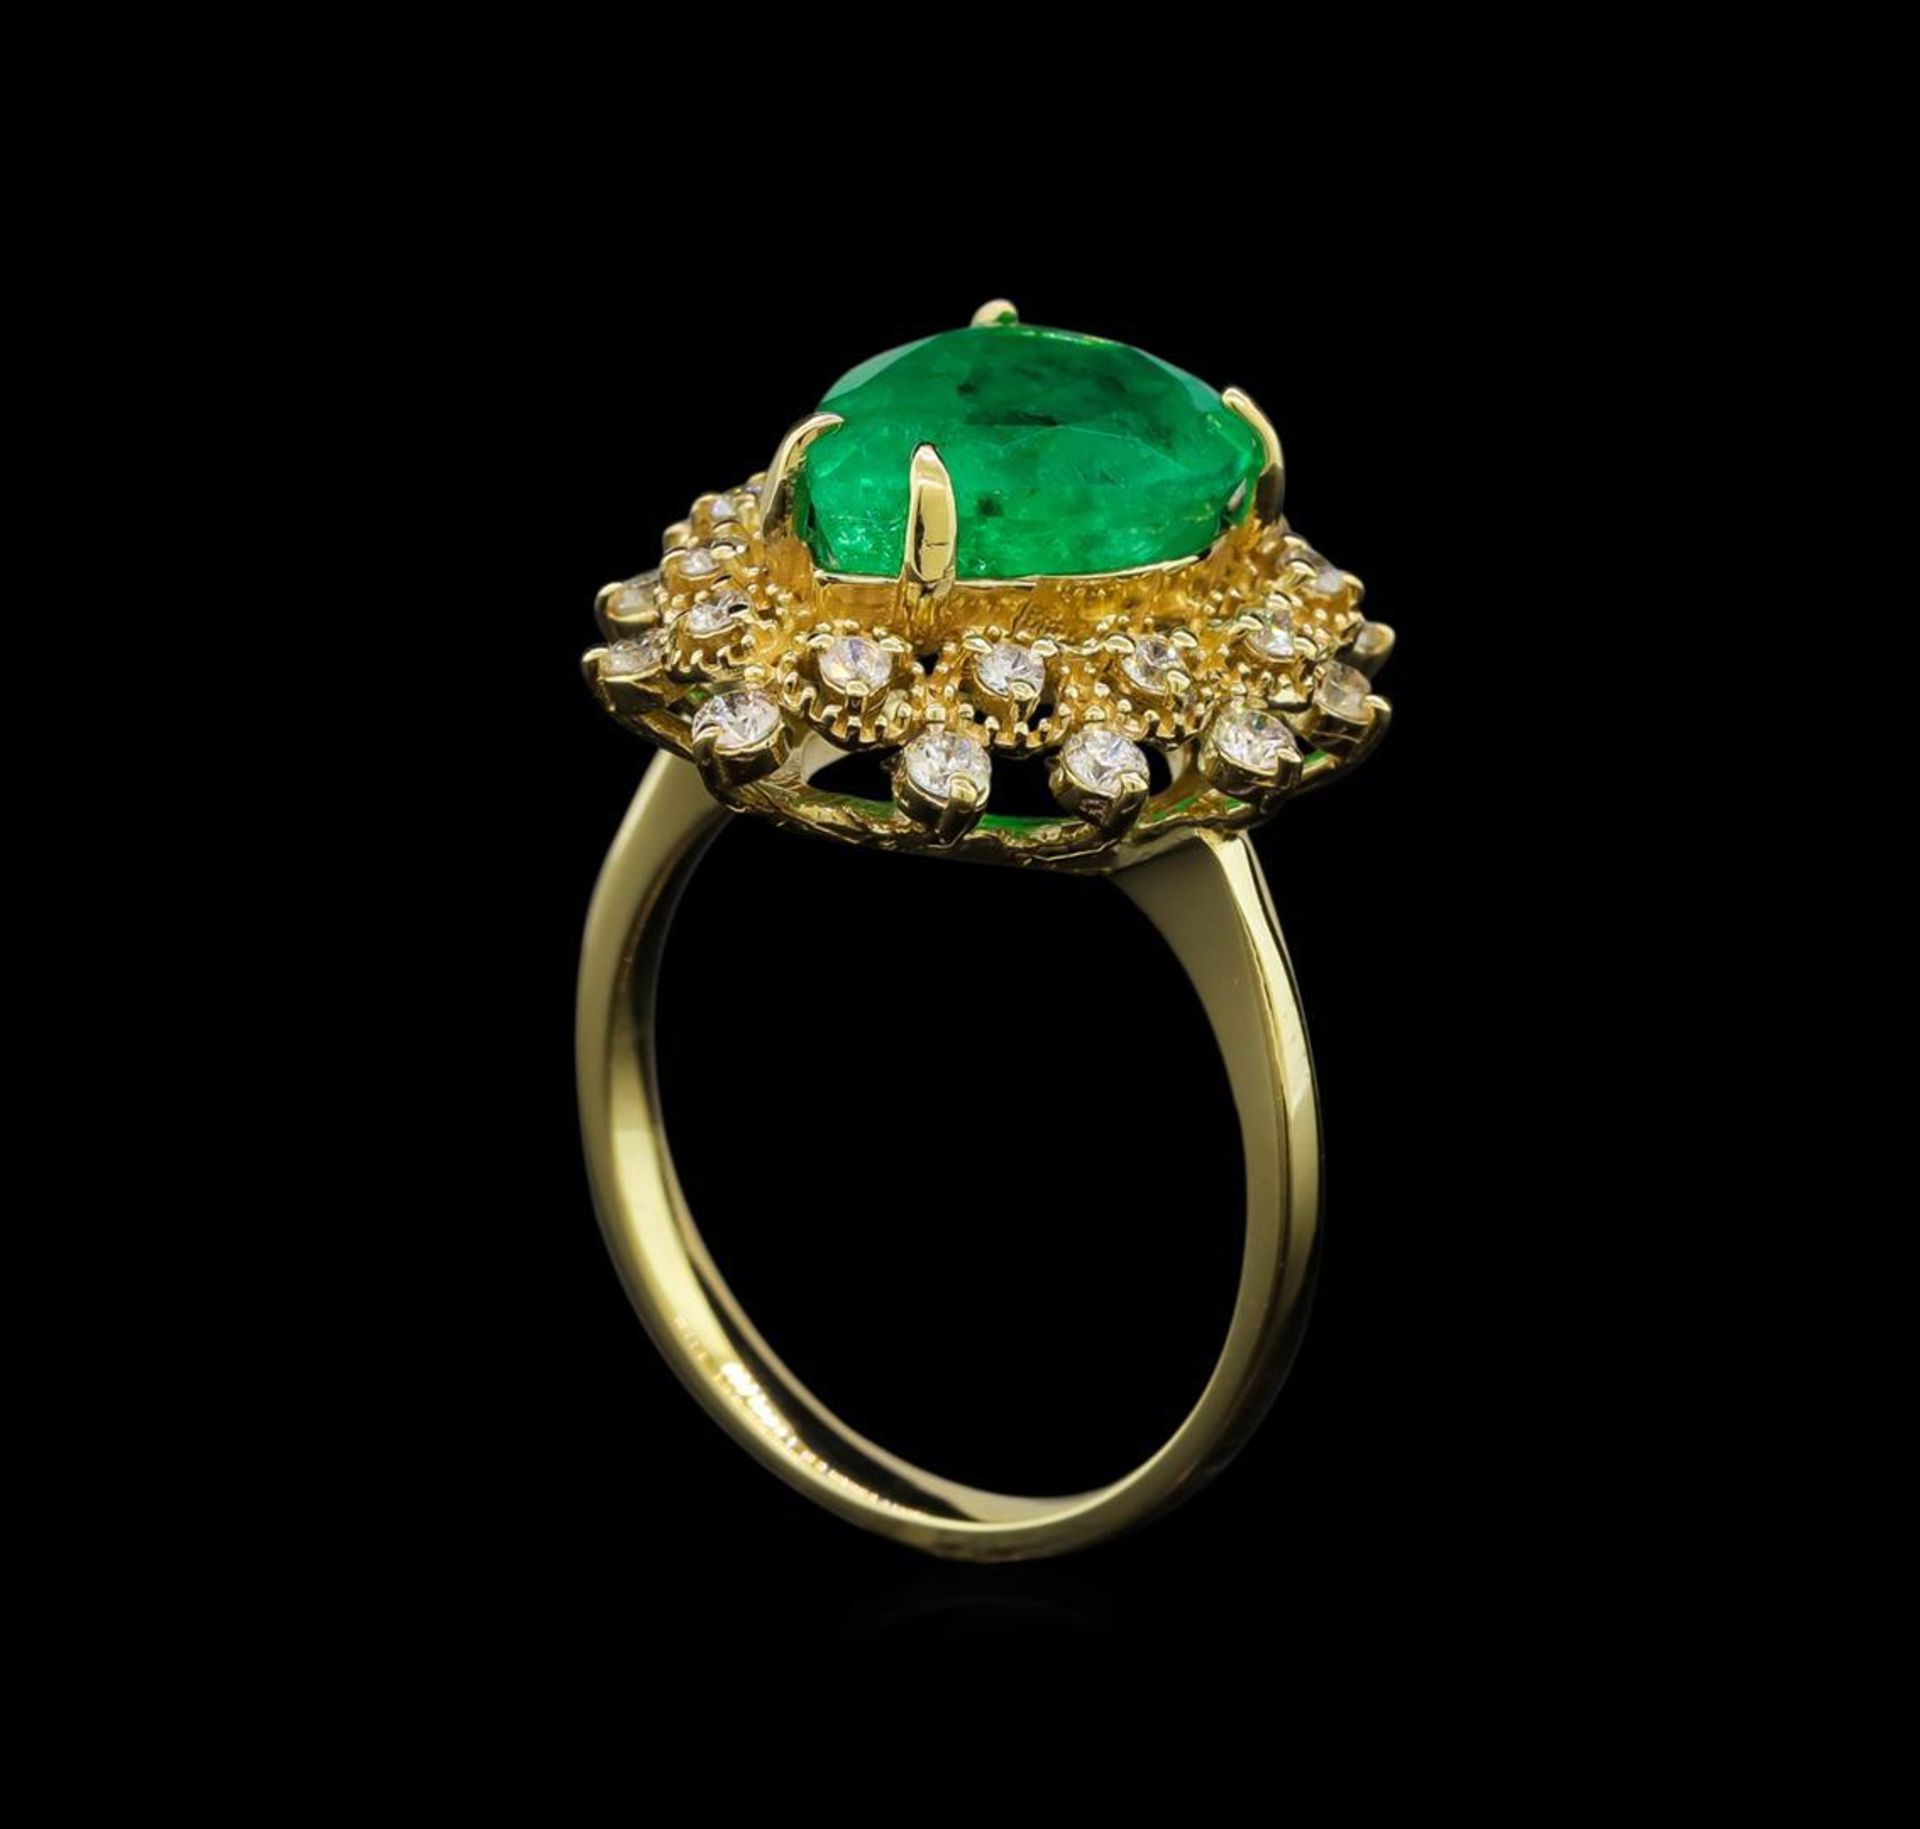 3.65 ctw Emerald and Diamond Ring - 14KT Yellow Gold - Image 4 of 5